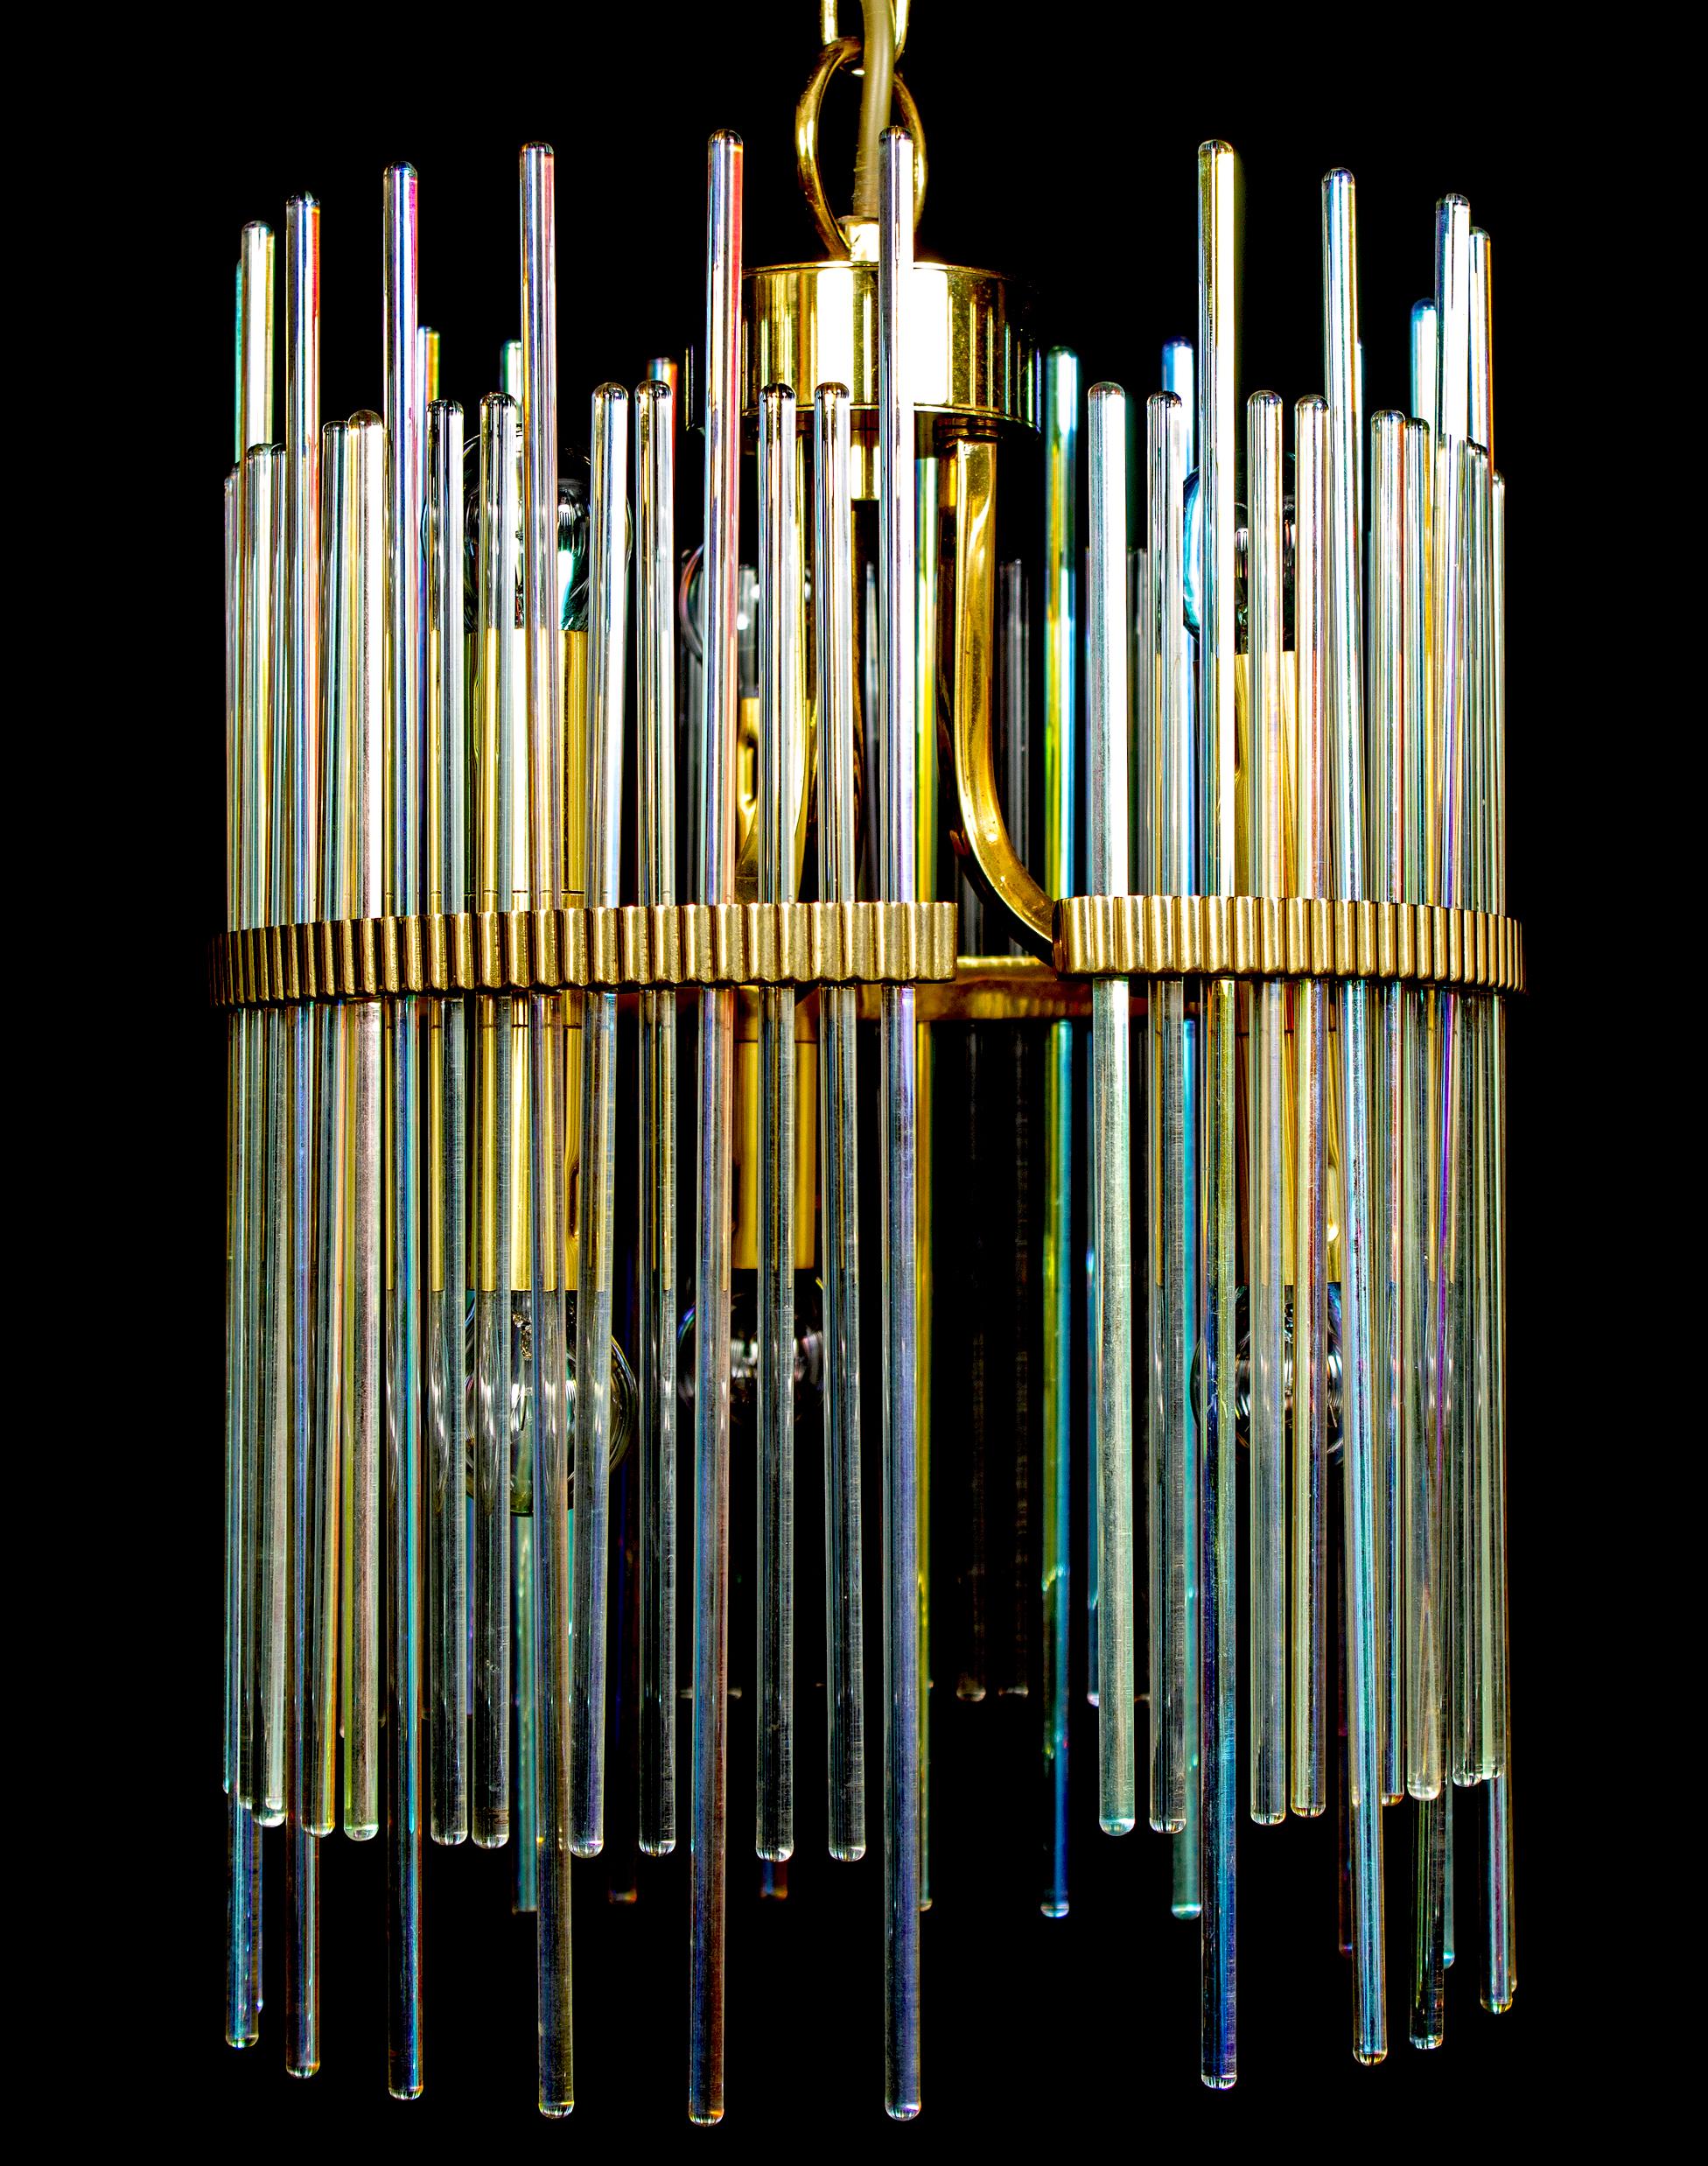 Stunning 1960s Gaetano Sciolari iridescent glass rod modernist chandeliers with brass frame. Six E 14 light bulbs.
Available also a pair of delicious table lights.
Excellent vintage condition.